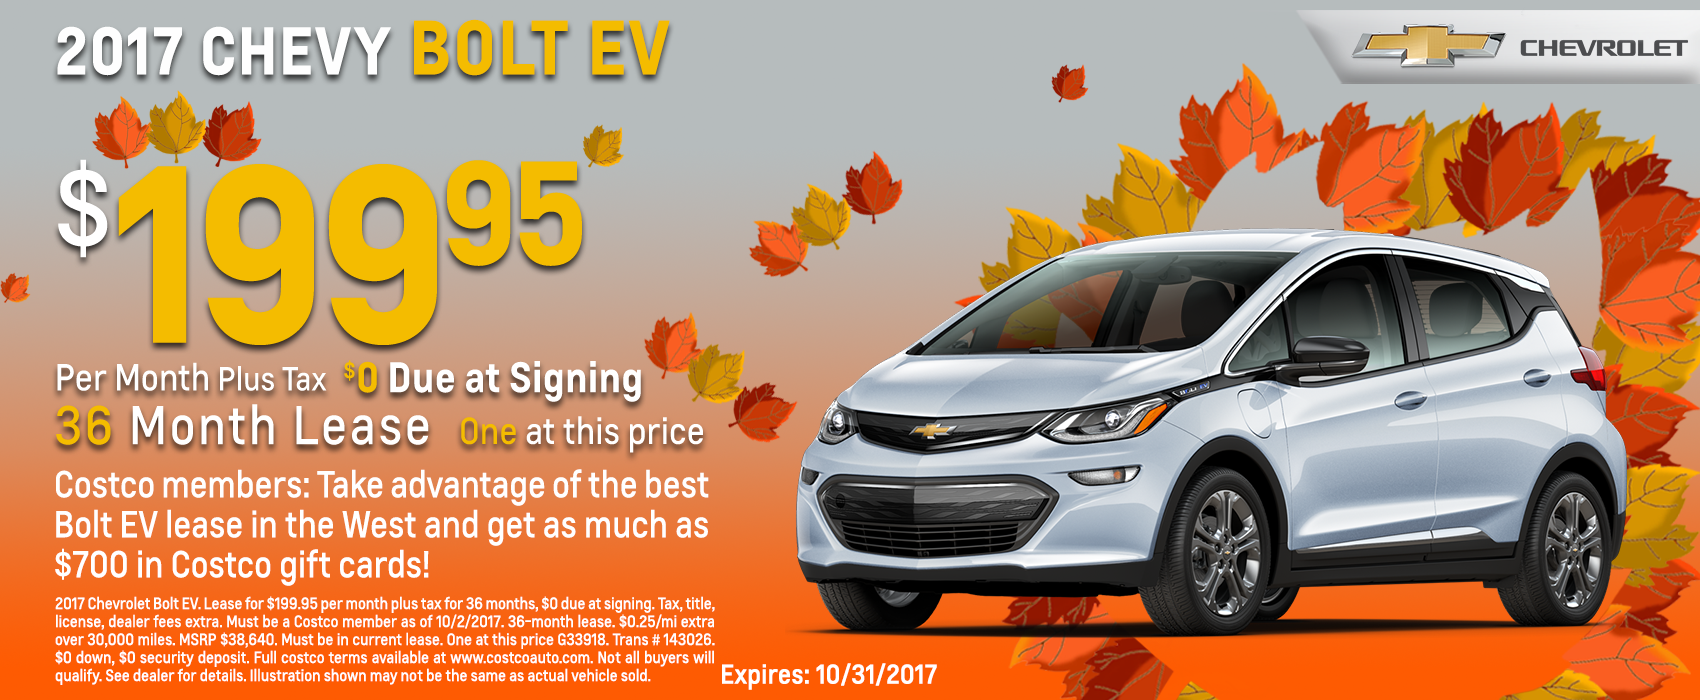 2017 Chevy Bolt Ev North Cal Lease 10k 36 Mo 200 Per Month See Deal